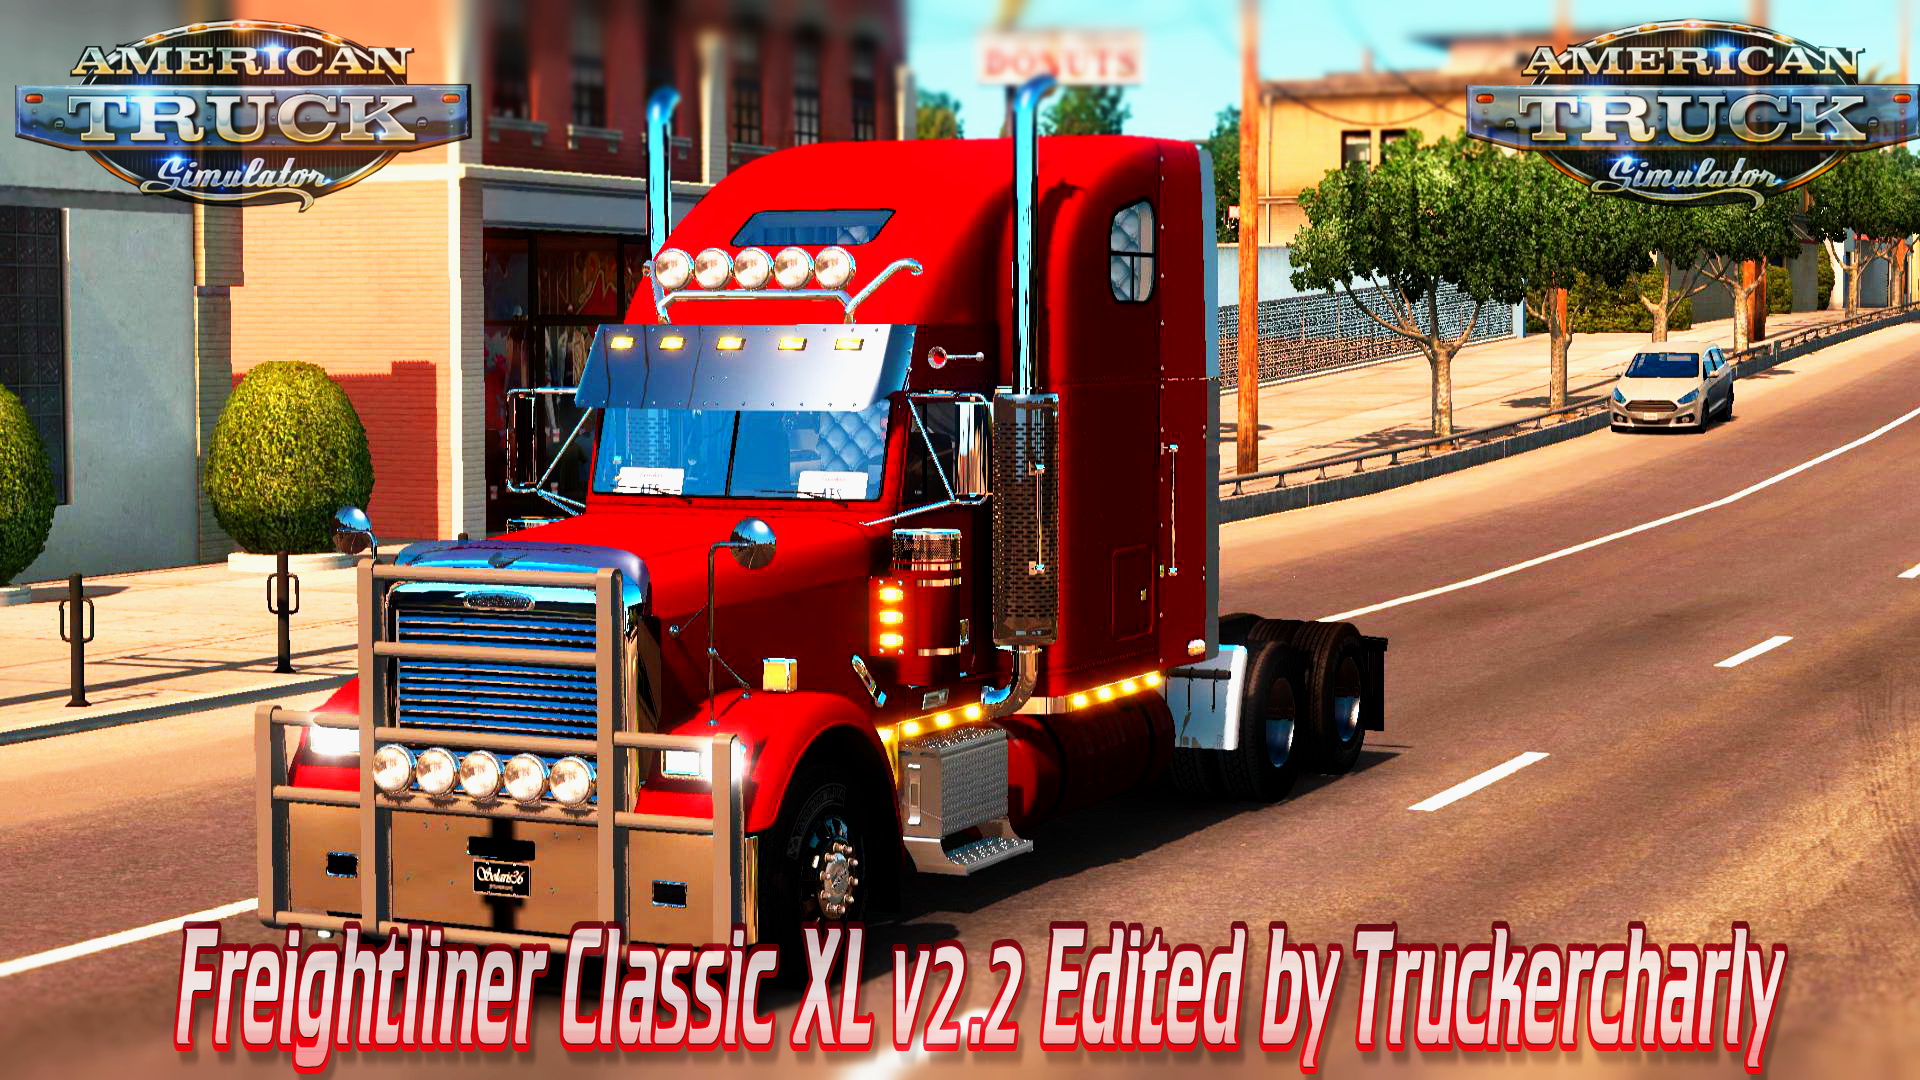 Freightliner Classic XL v2.2 Edited by Truckercharly